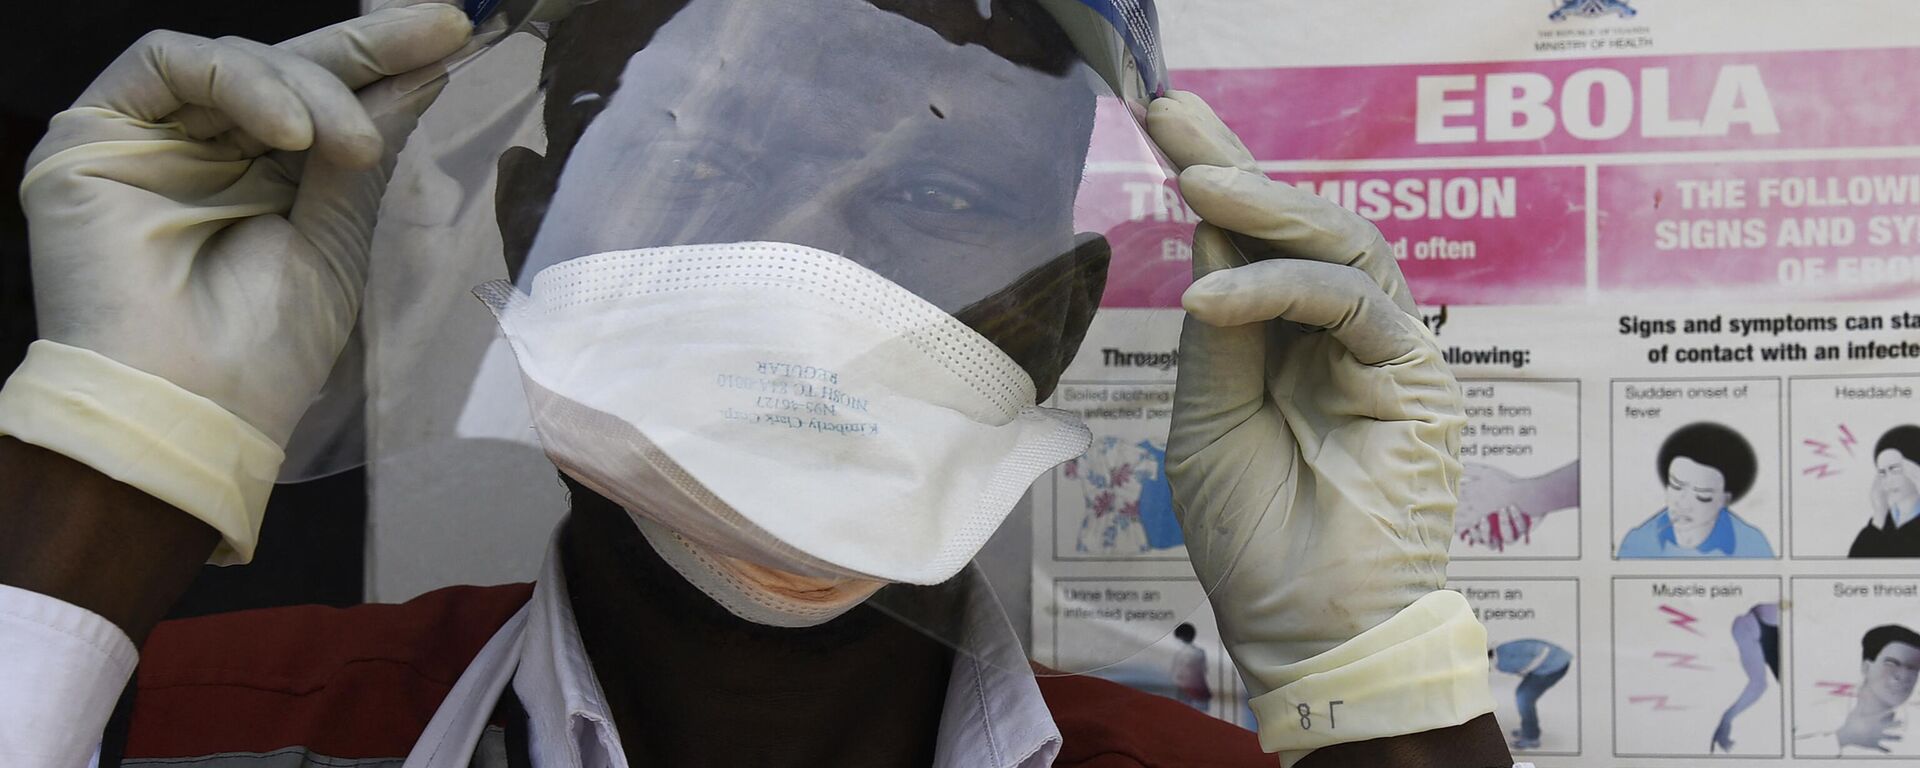 A health worker puts on protective gears as he prepares to screen travellers at the Mpondwe Health Screening Facility in the Uganda's border town of Mpondwe as they cross over from the Democratic Republic of Congo, on June 13, 2019. - Sputnik International, 1920, 24.09.2022